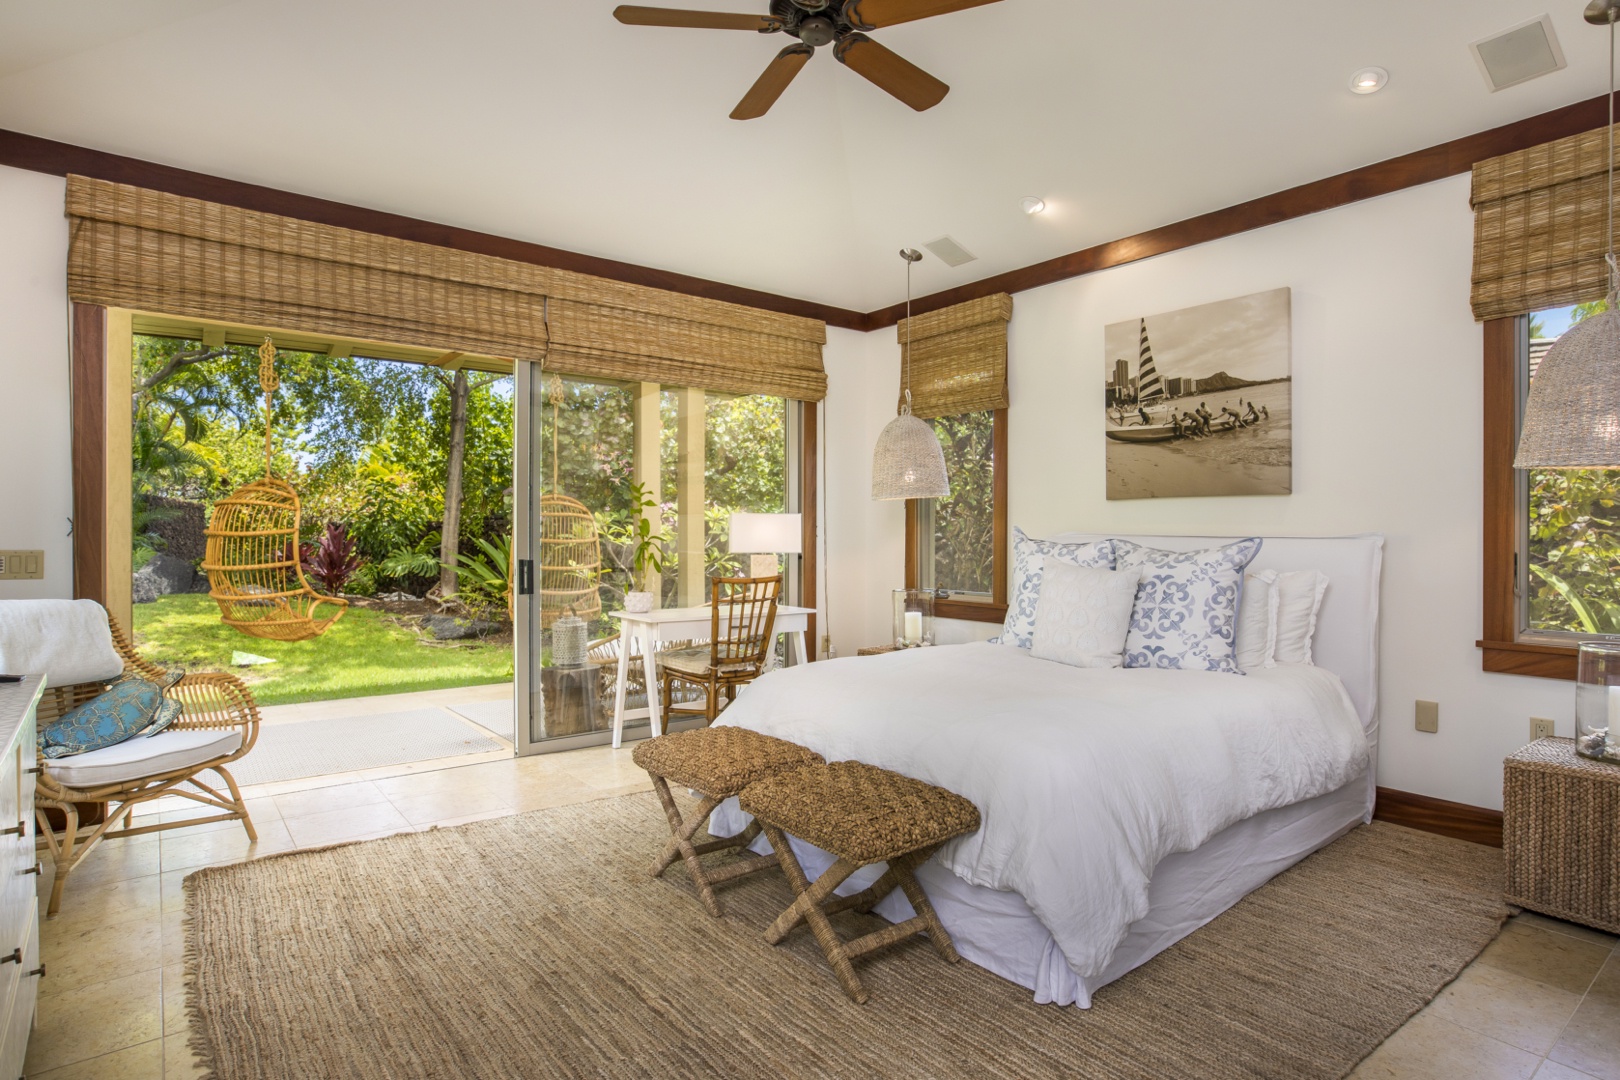 Kailua Kona Vacation Rentals, 4BD Kahikole Street (218) Estate Home at Four Seasons Resort at Hualalai - The elegant fourth bedroom (Ohana suite) features a queen bed & private lanai with two hanging chairs & a daybed